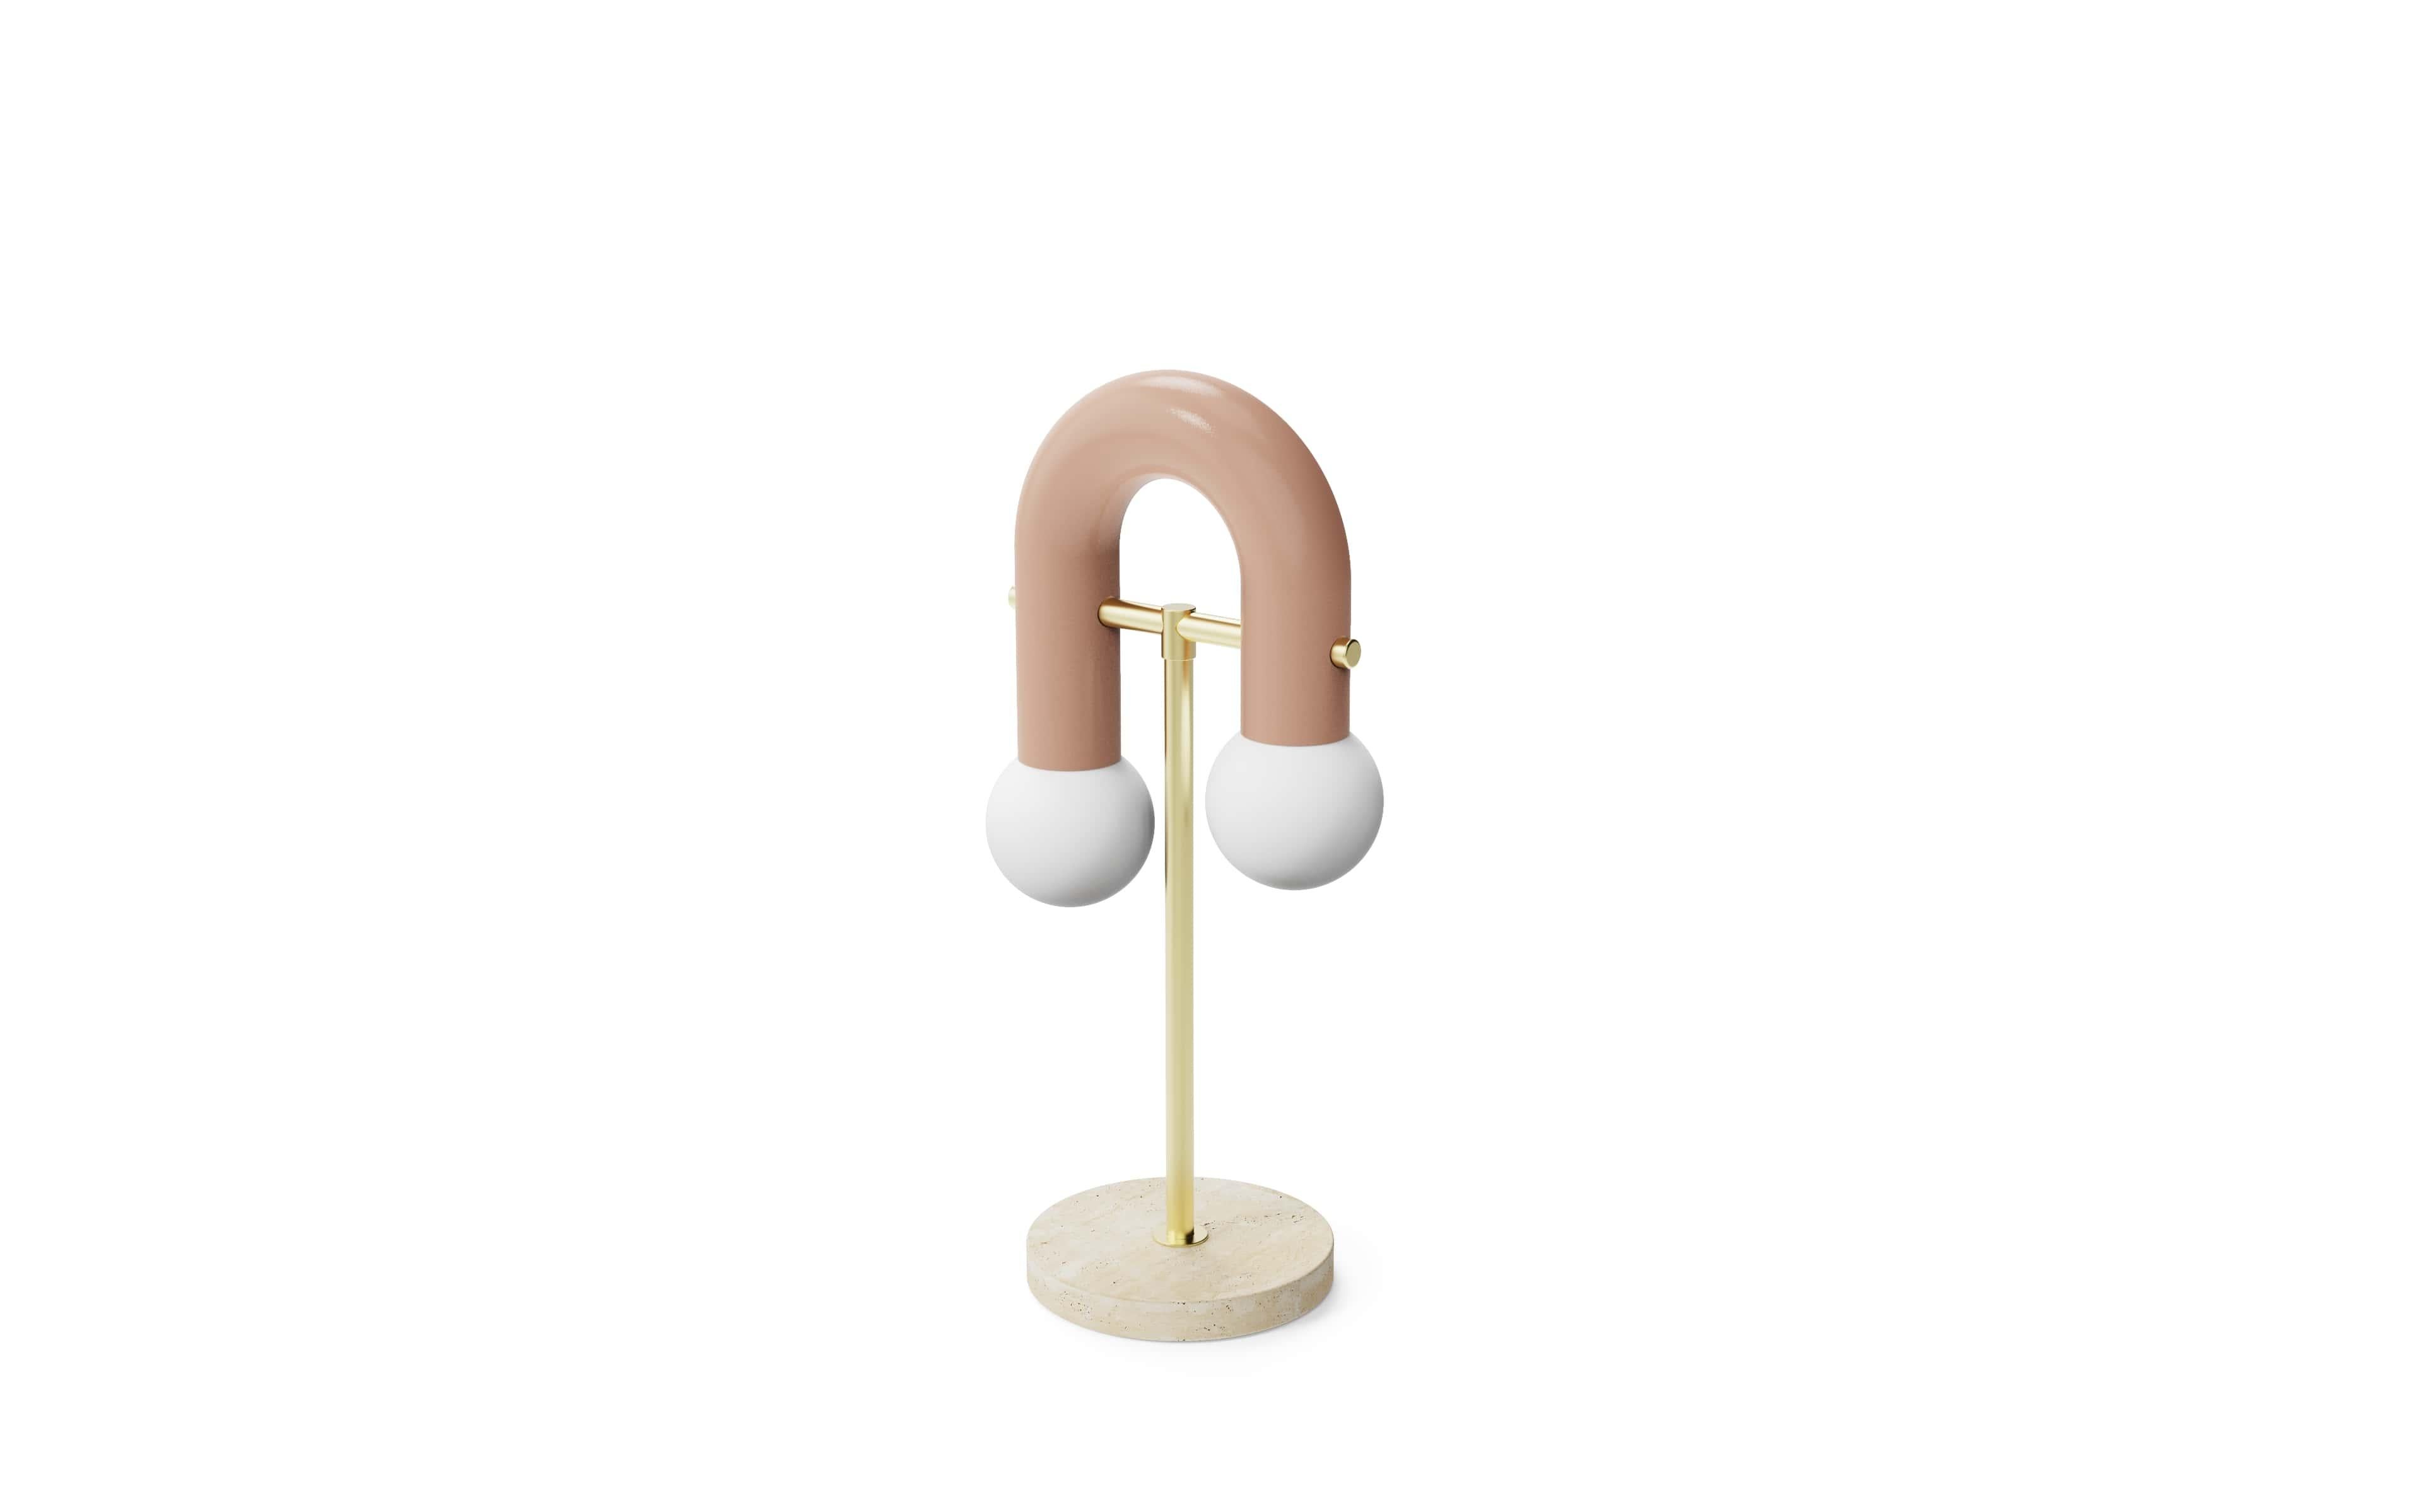 Pyppe table lamp by Dooq
Dimensions: 35 x 12 x 25 cm
Materials: Lacquered metal, brass, nickel/copper, travertine

All our lamps can be wired according to each country. If sold to the USA it will be wired for the USA for instance.

Dooq is a